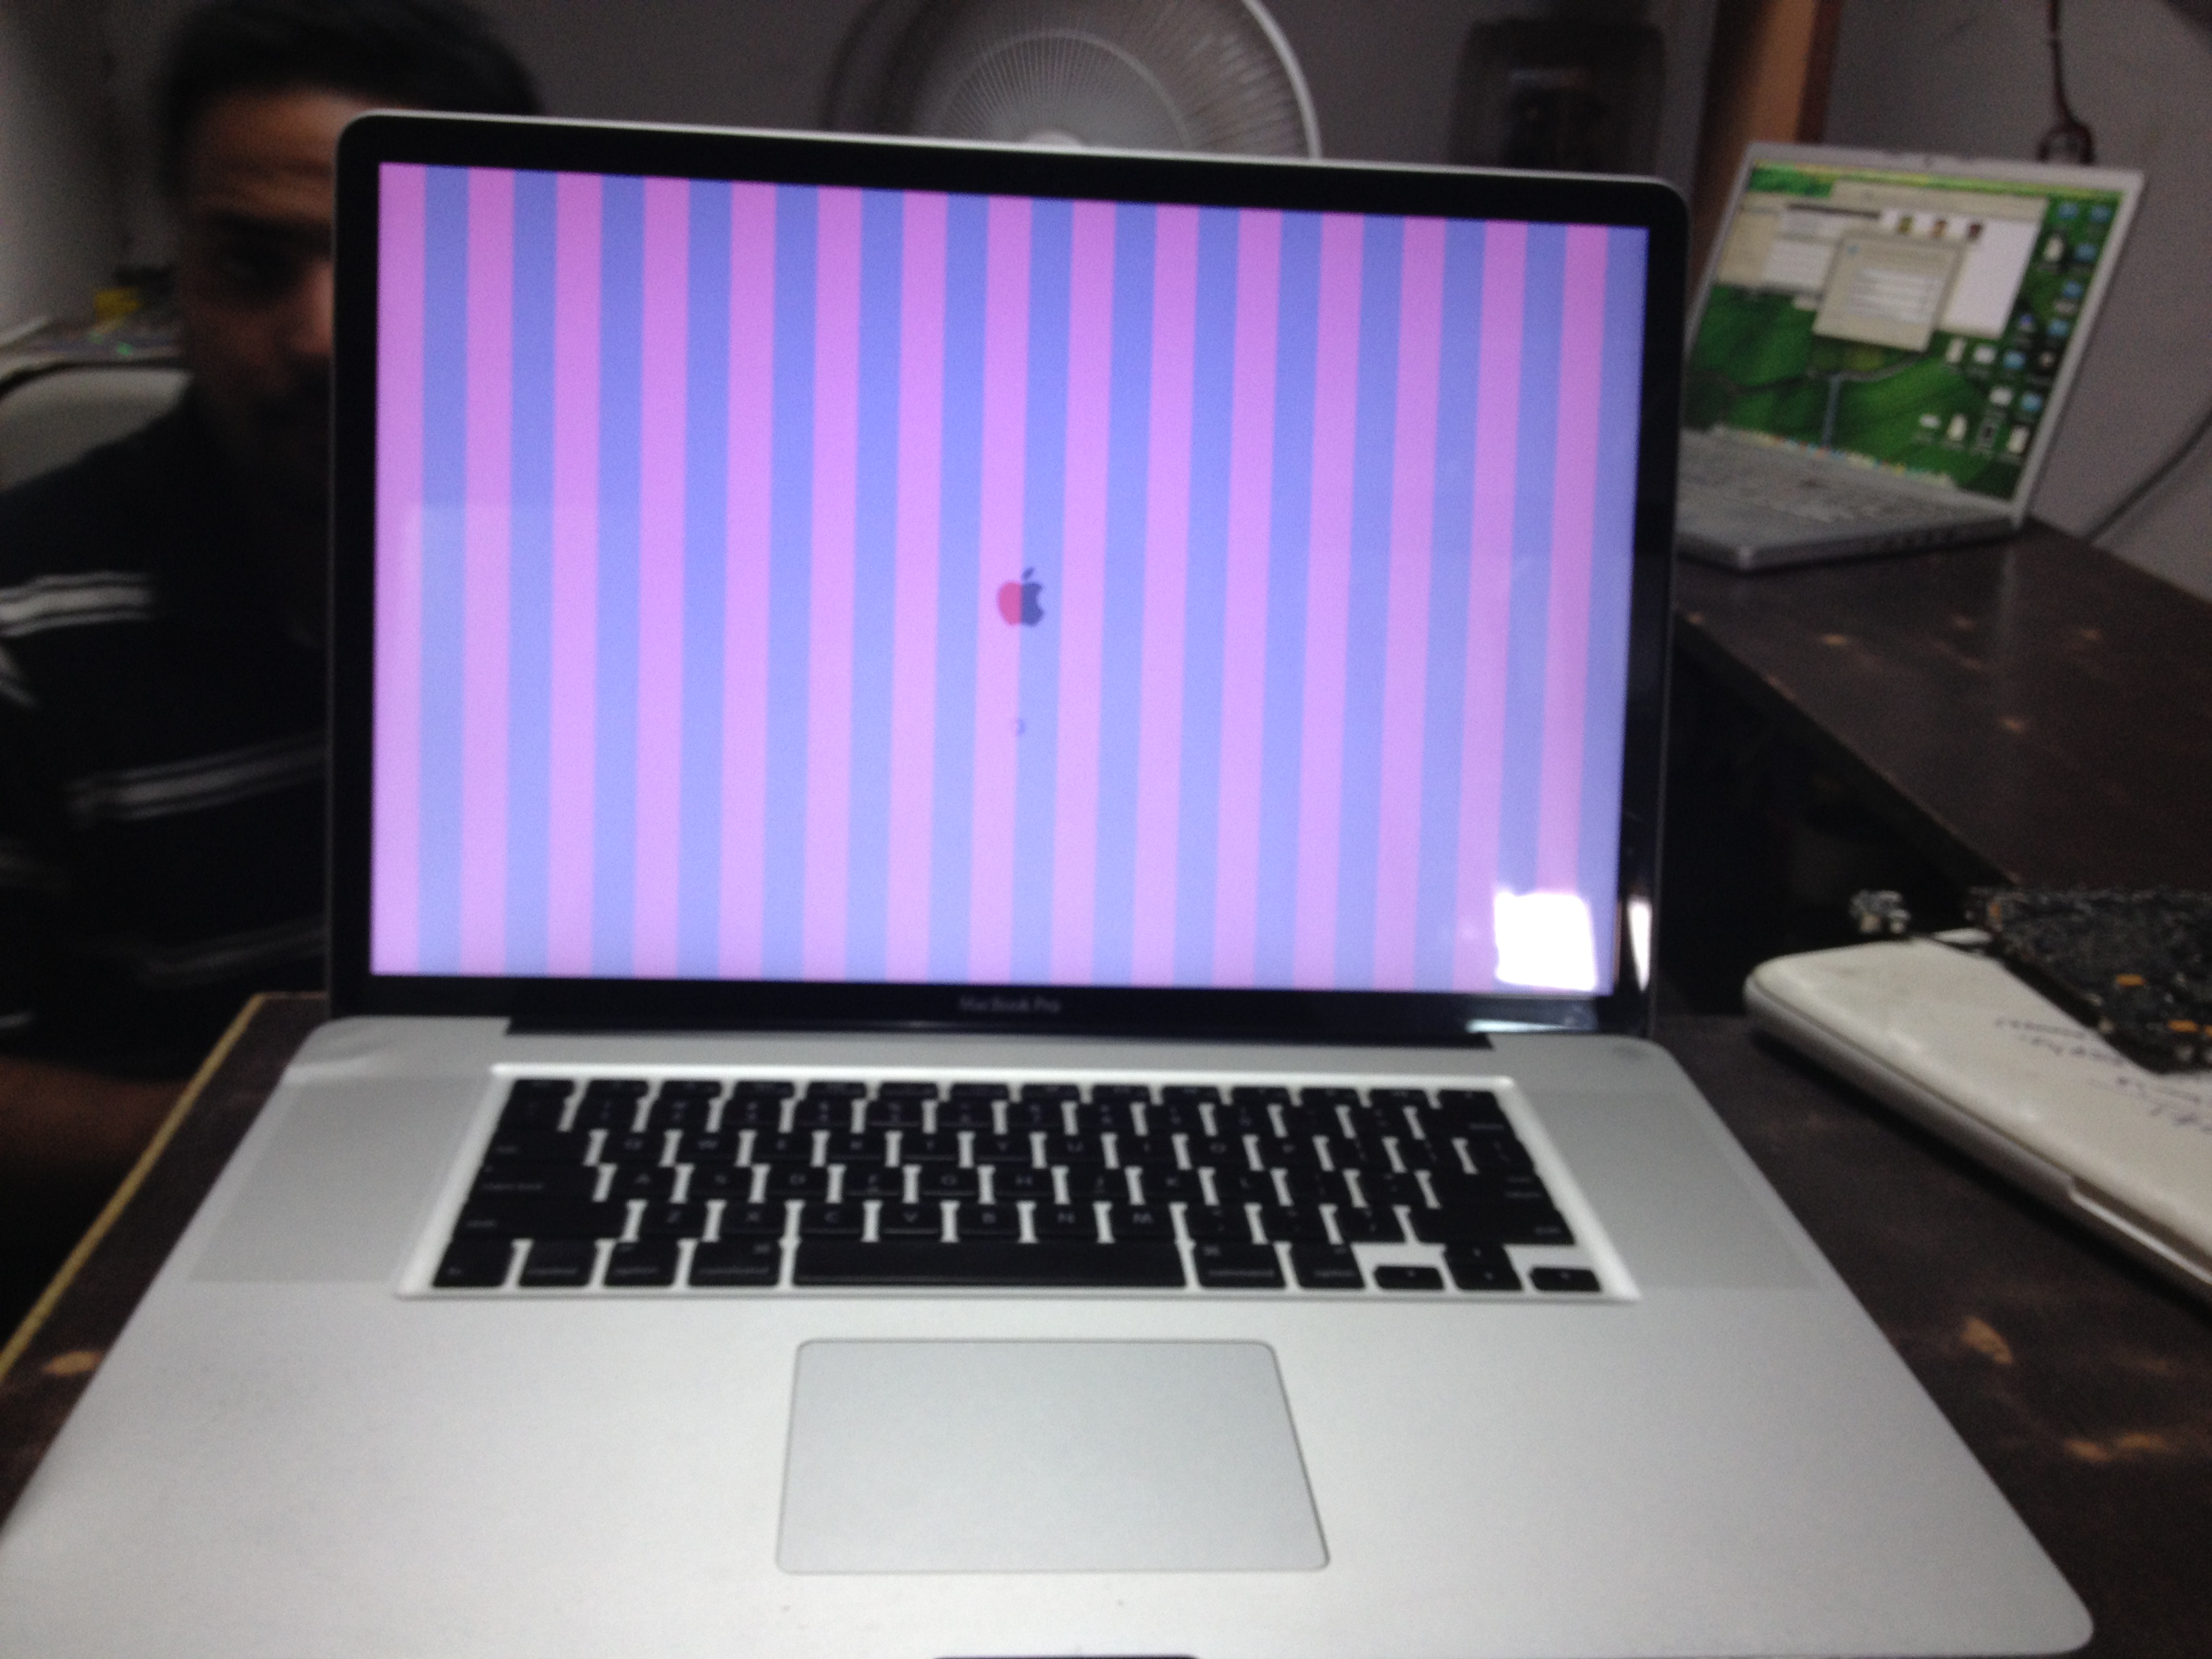 Macbook Pro graphics failure finally addressed by Apple